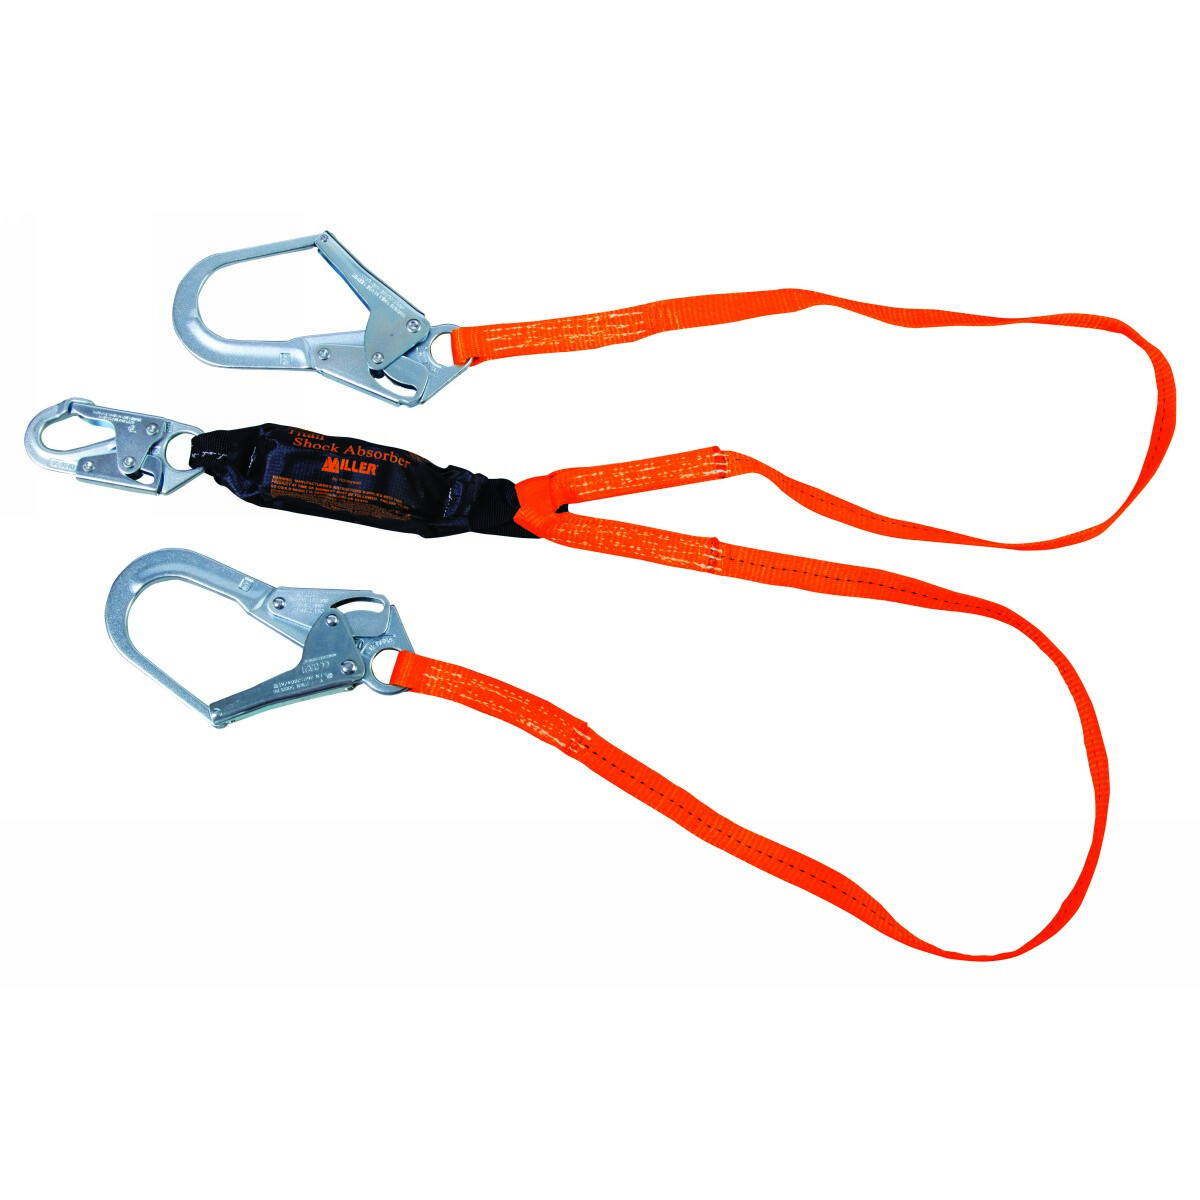 Honeywell Miller® Titan™ Harness And Lanyard Fall Protection Kit With Universal Harness, 6' Pack-Type Lanyard, Locking Snap Hook